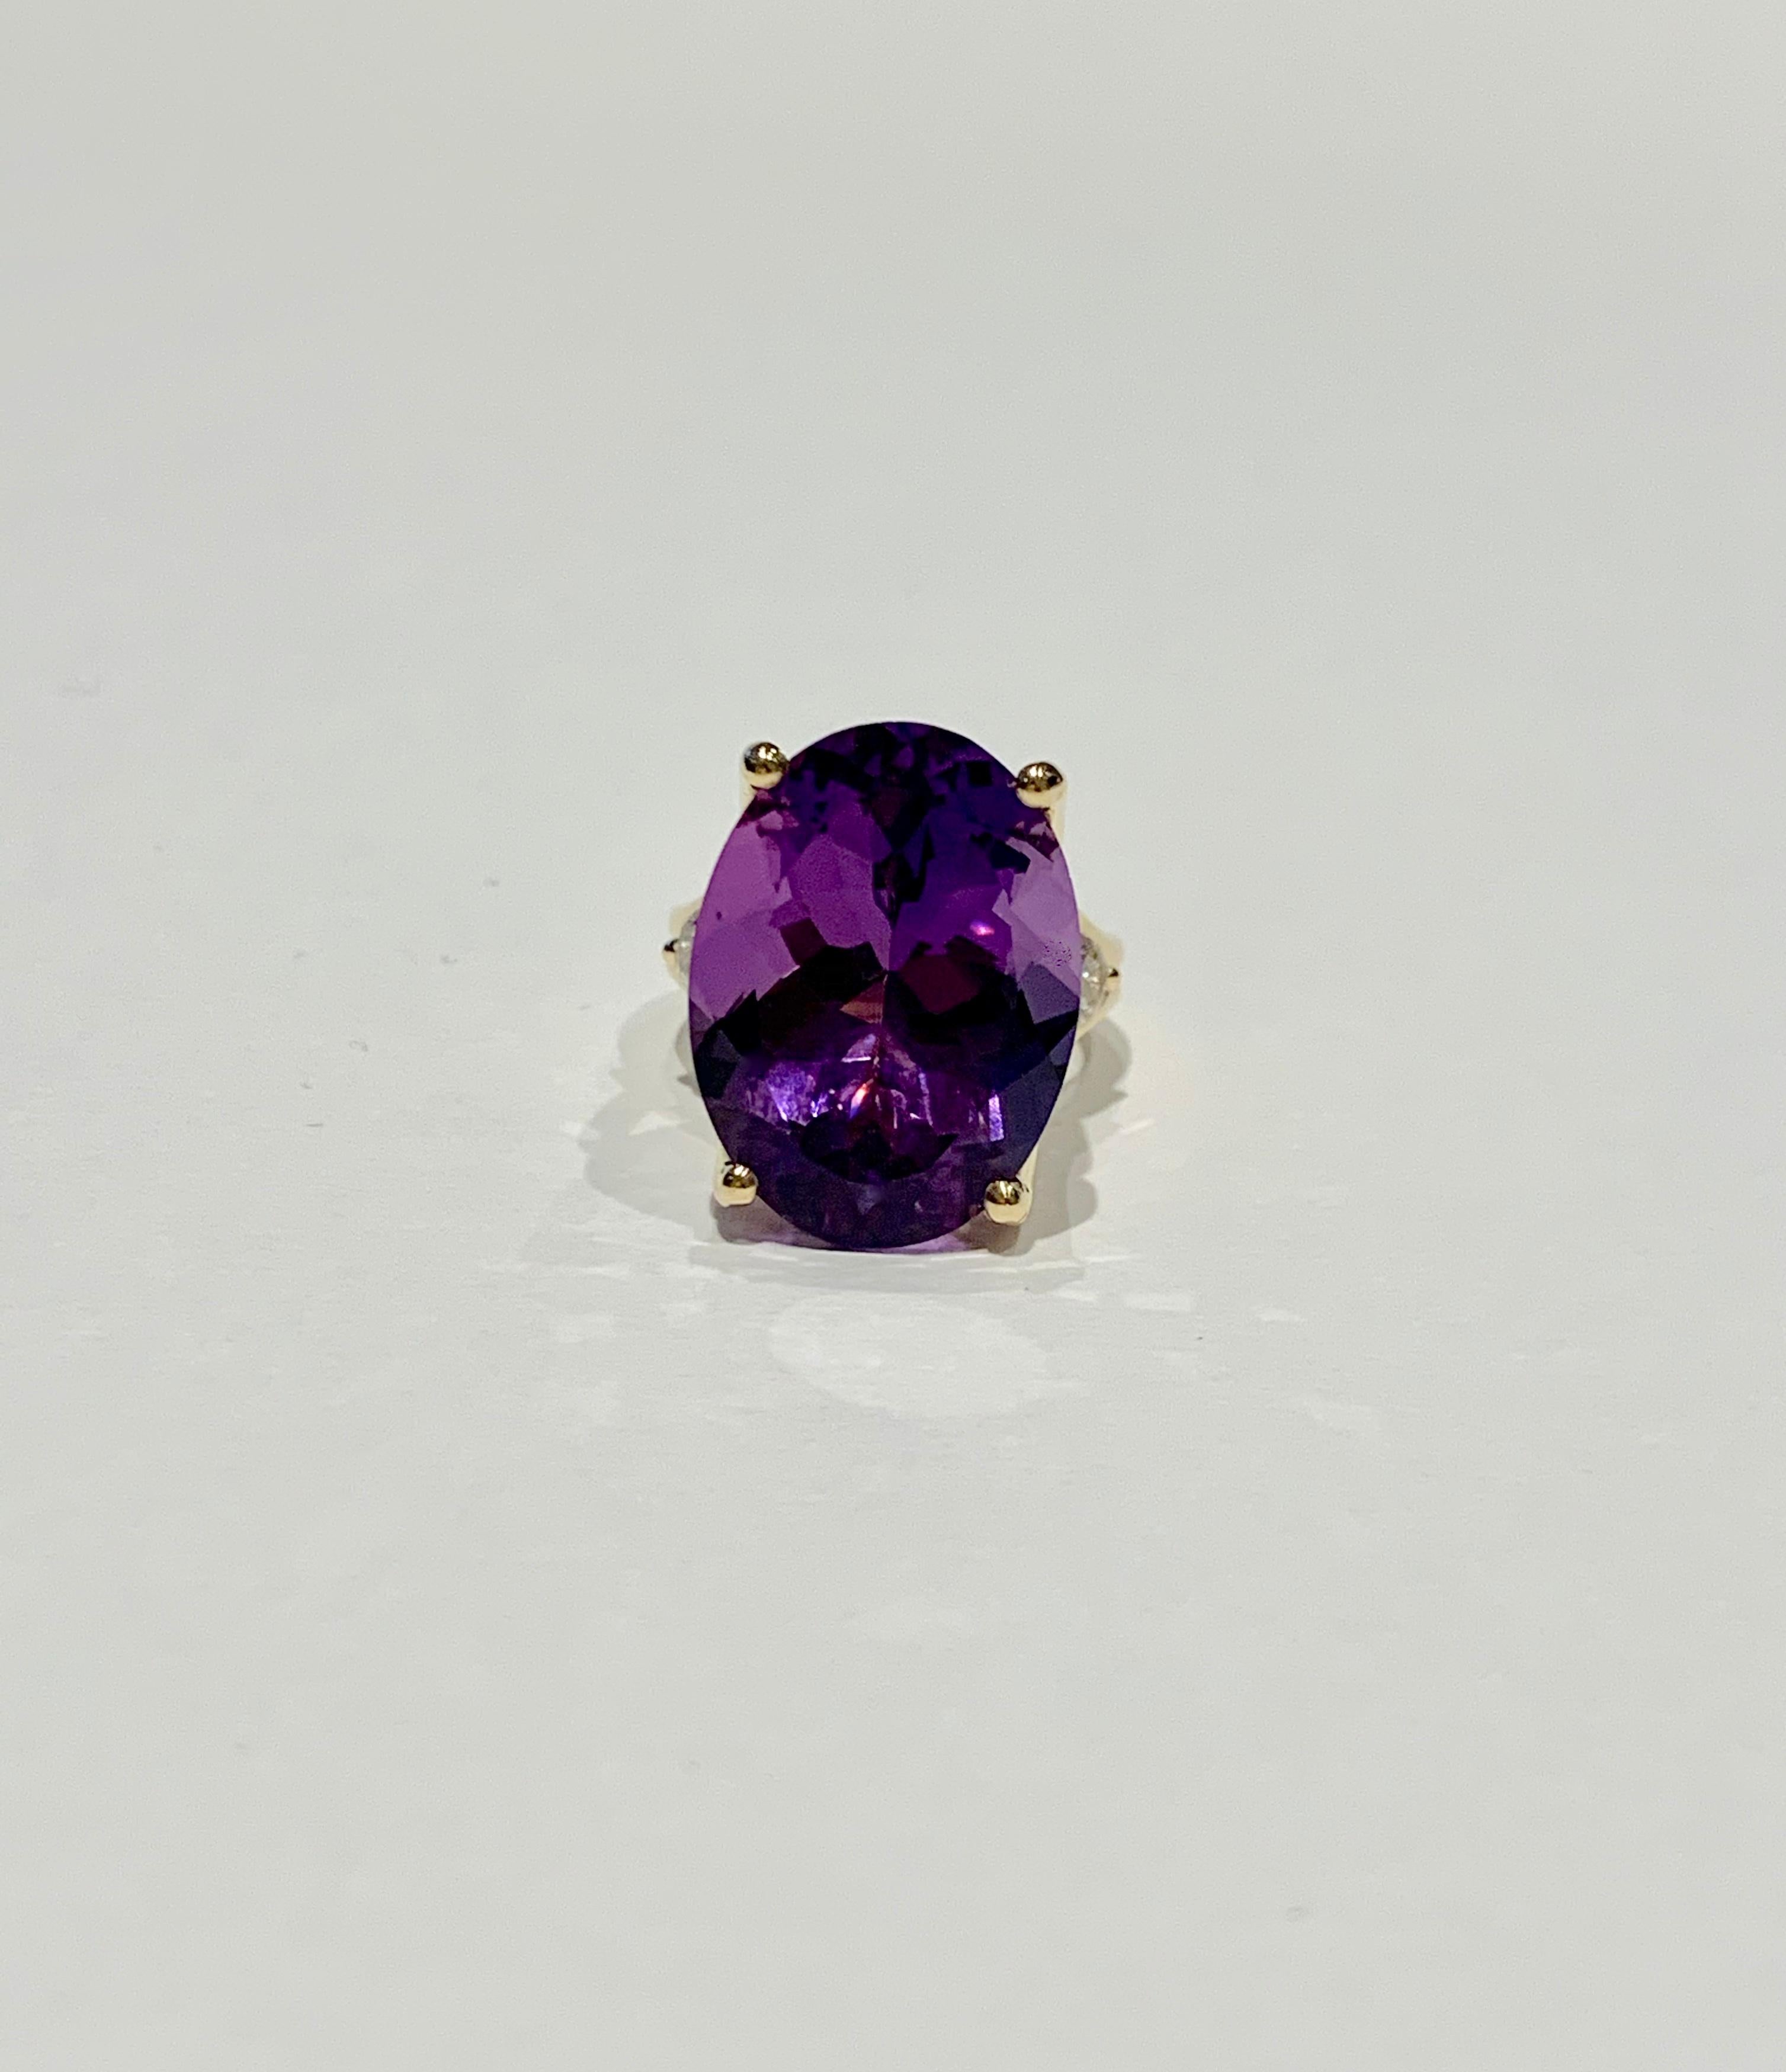 This BESPOKE cocktail ring features a beautiful 16 ct dark purple oval Amethyst* which is the Birthstone for February.  The Amethyst has wonderful transparency and is set in a double band of 18ct Yellow Gold with four claws and two .25ct round